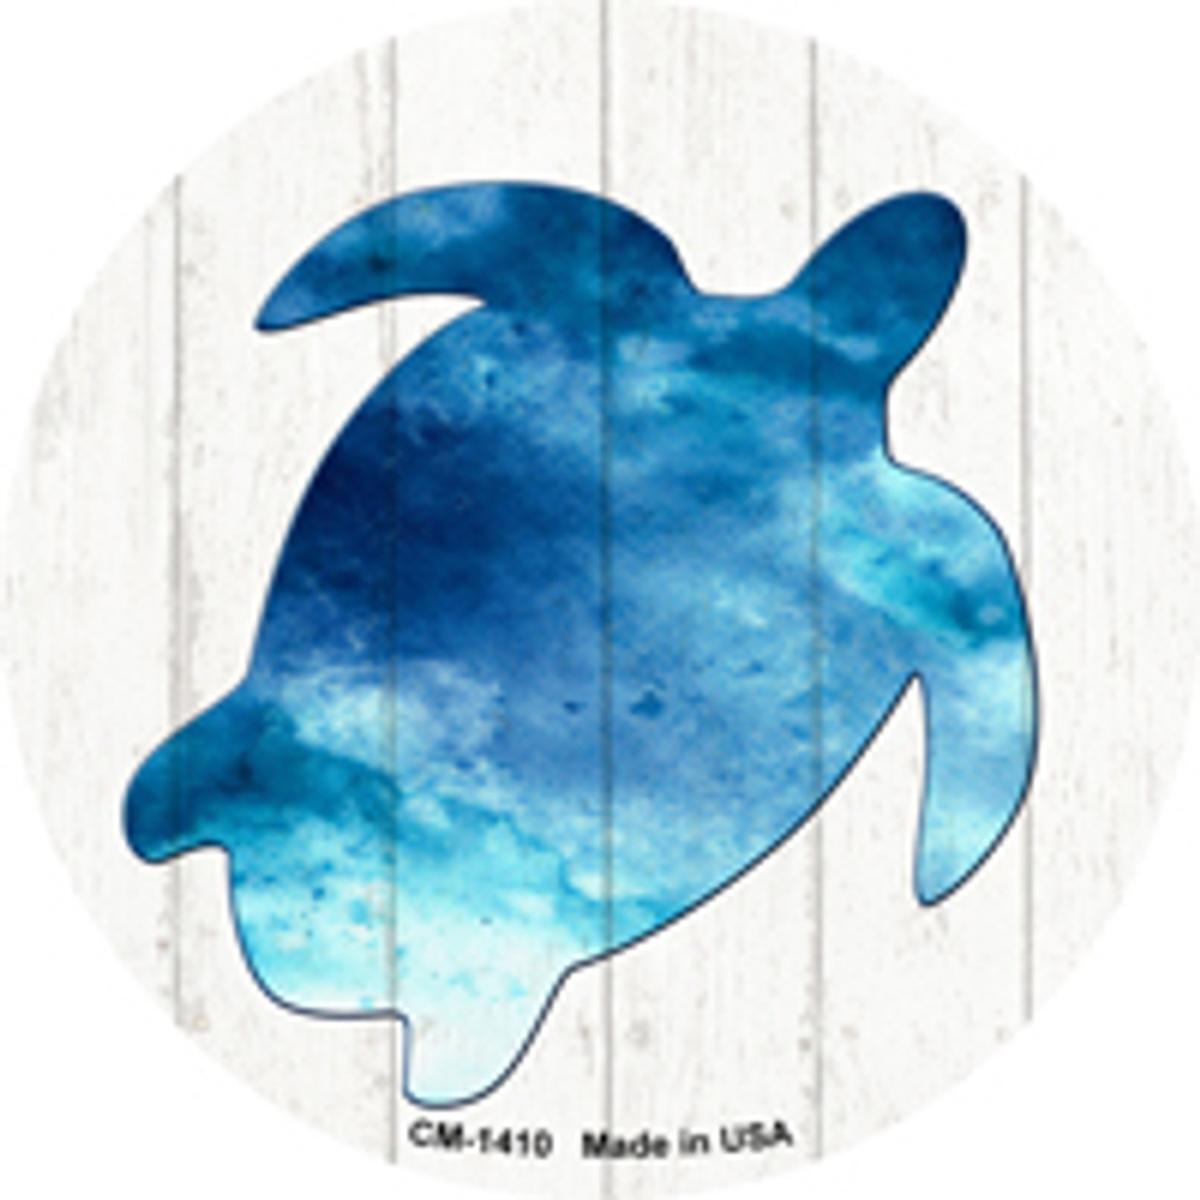 Smart Blonde CC-1410 3.5 in. Seaturtle Silhouette Novelty Circle Coaster - Set of 4